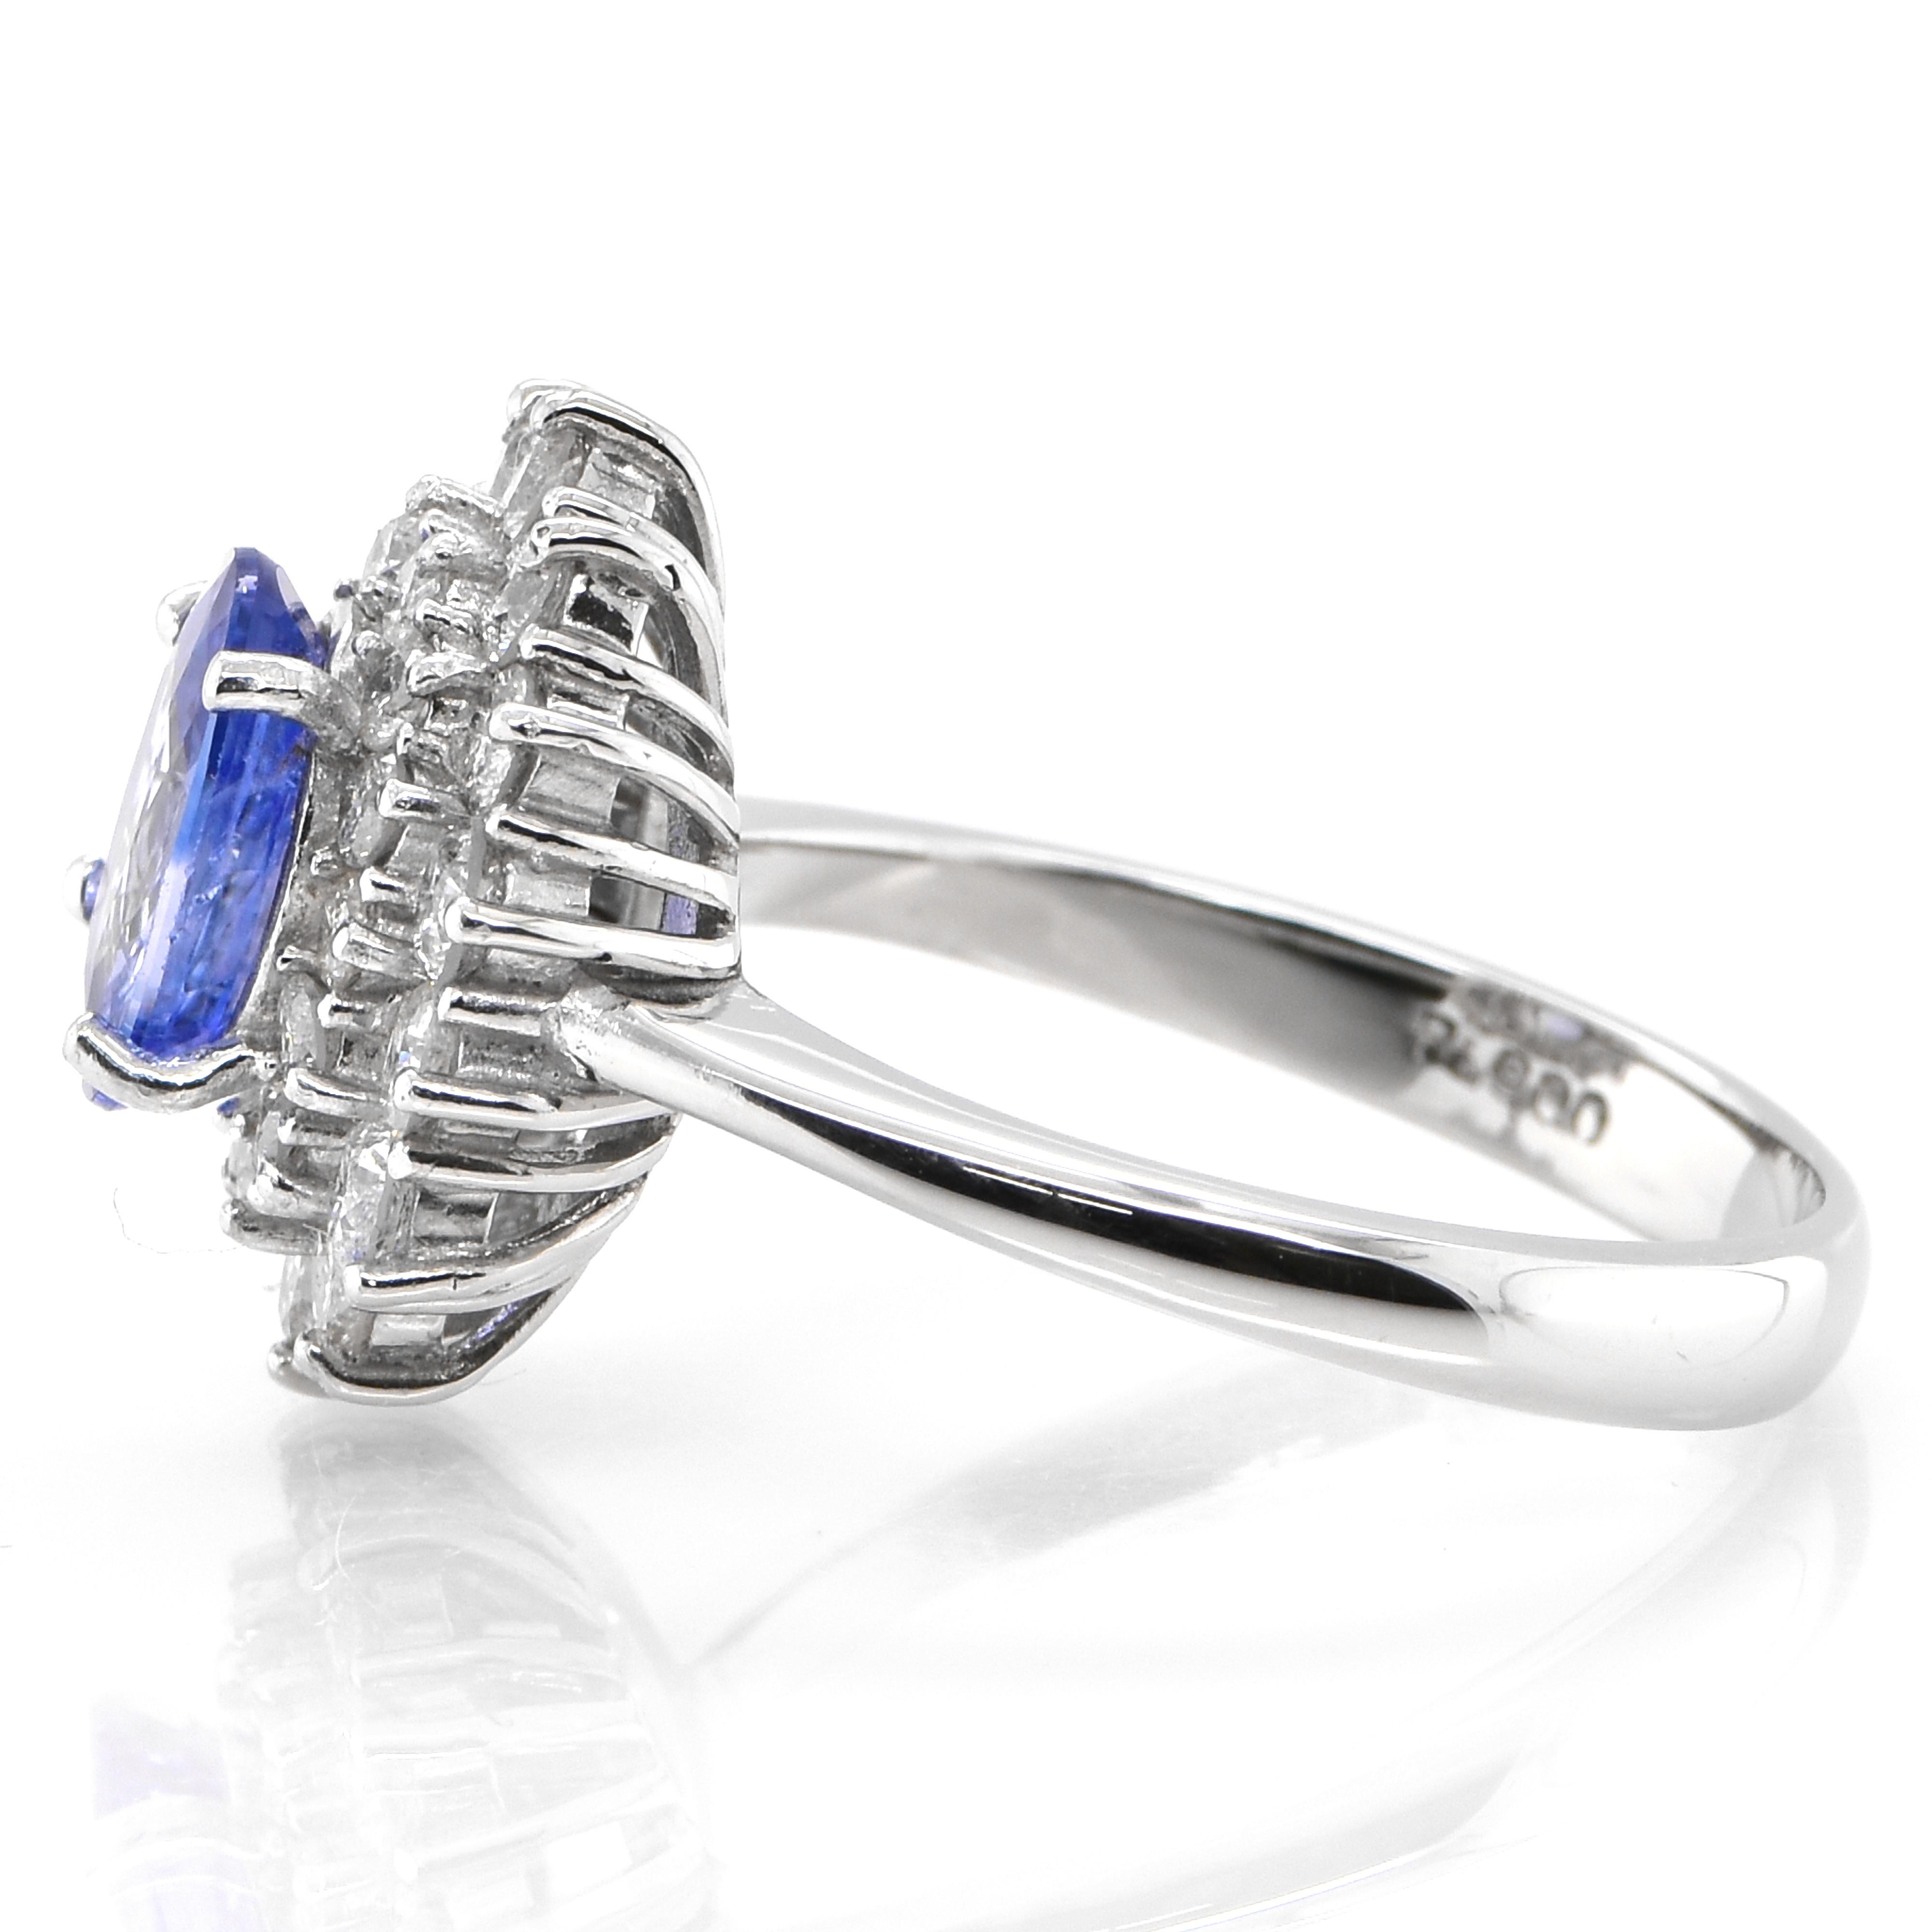 Oval Cut 1.35 Carat Natural 'Cornflower Blue' Sapphire and Diamond Made in Platinum For Sale